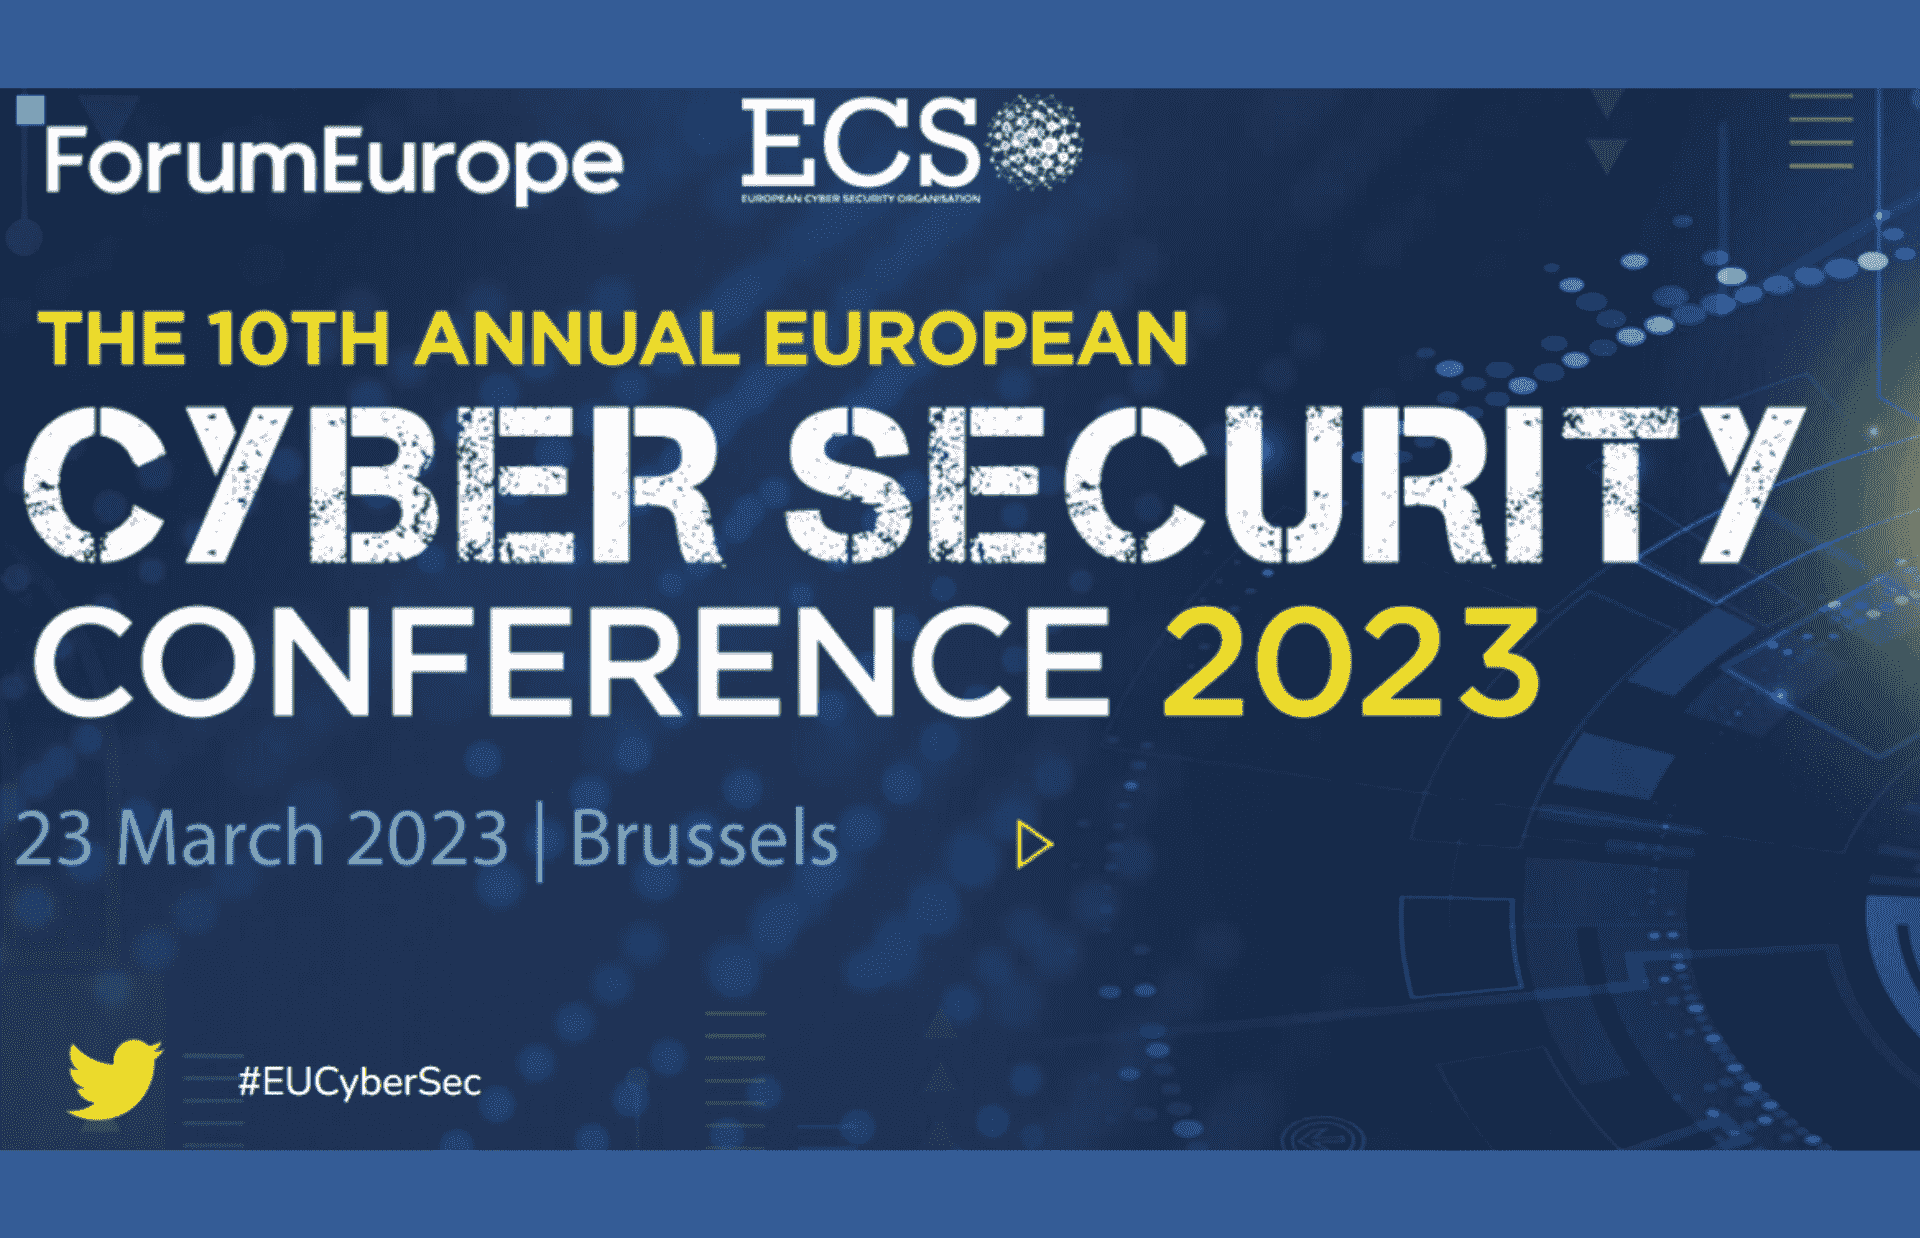 The 10th European Cyber Security Conference ECSO